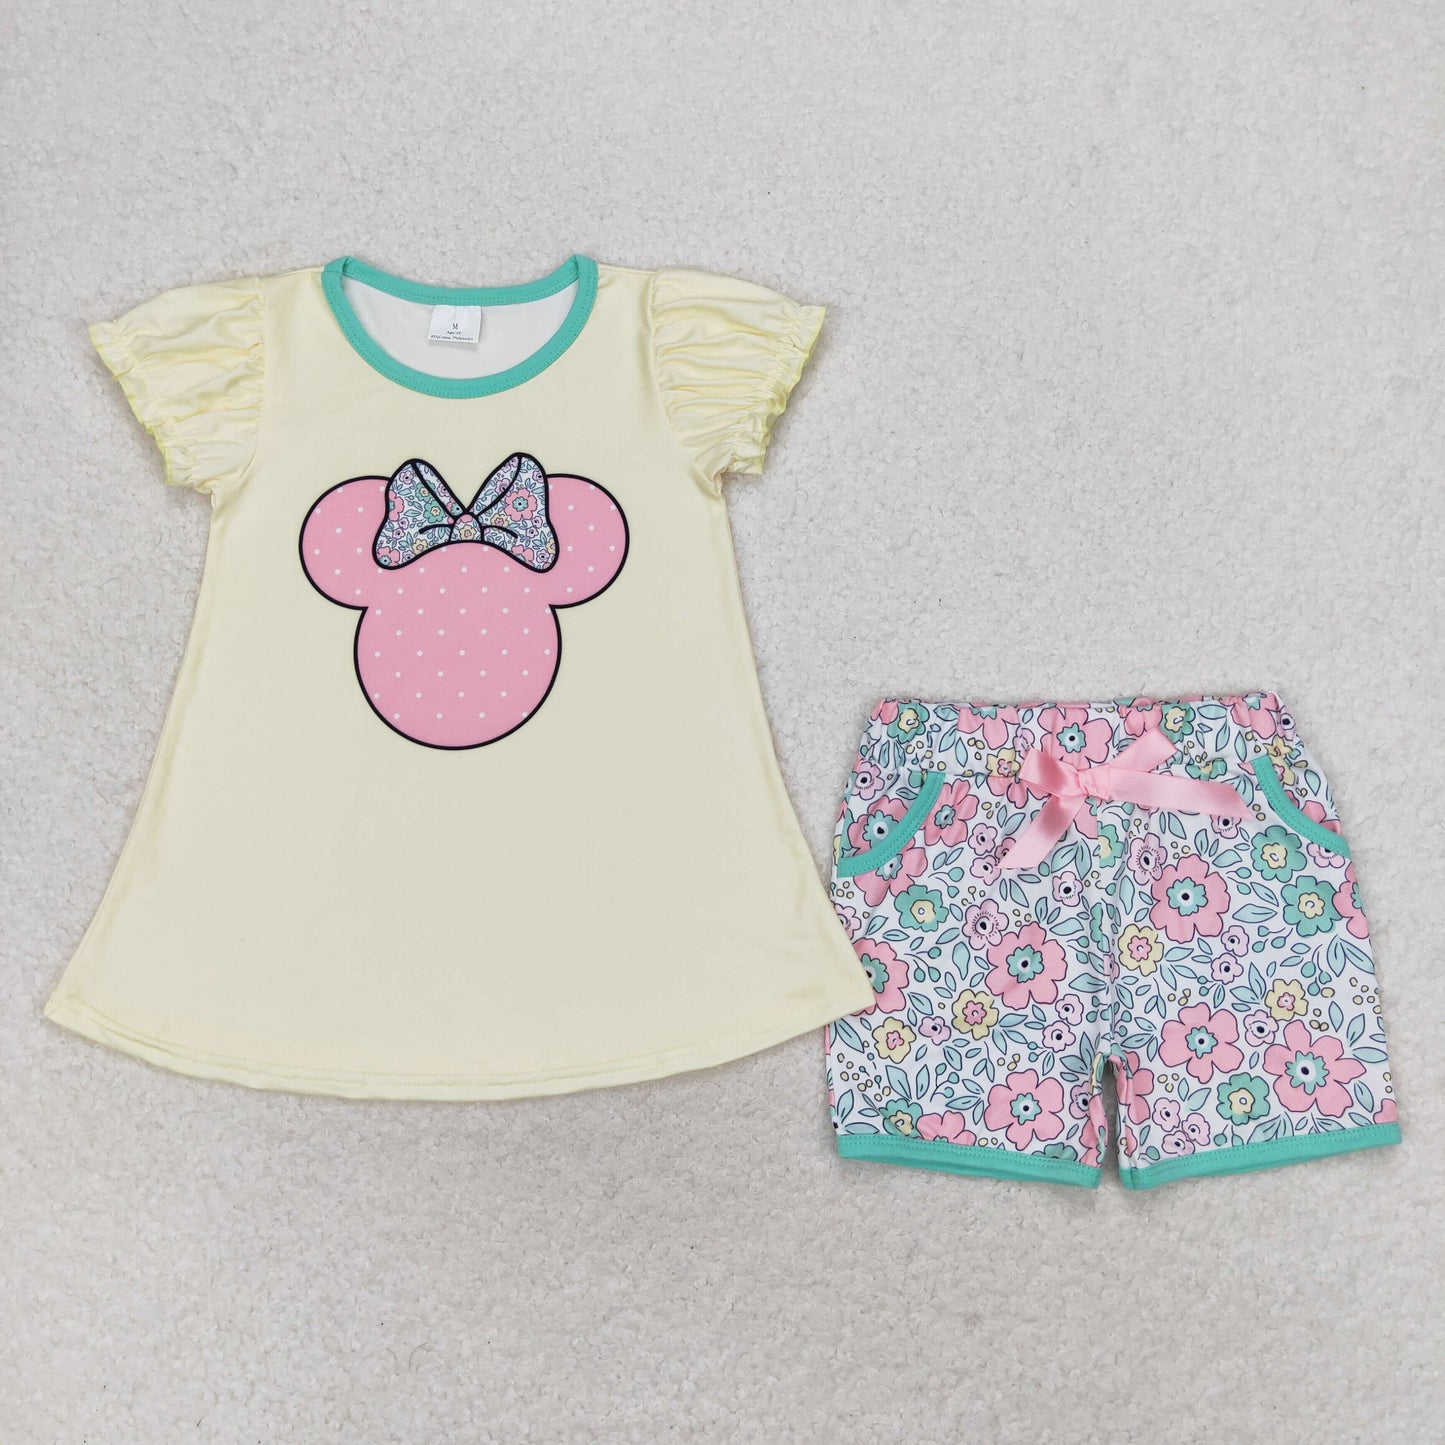 Pockets Flowers Shorts Clothes Sets